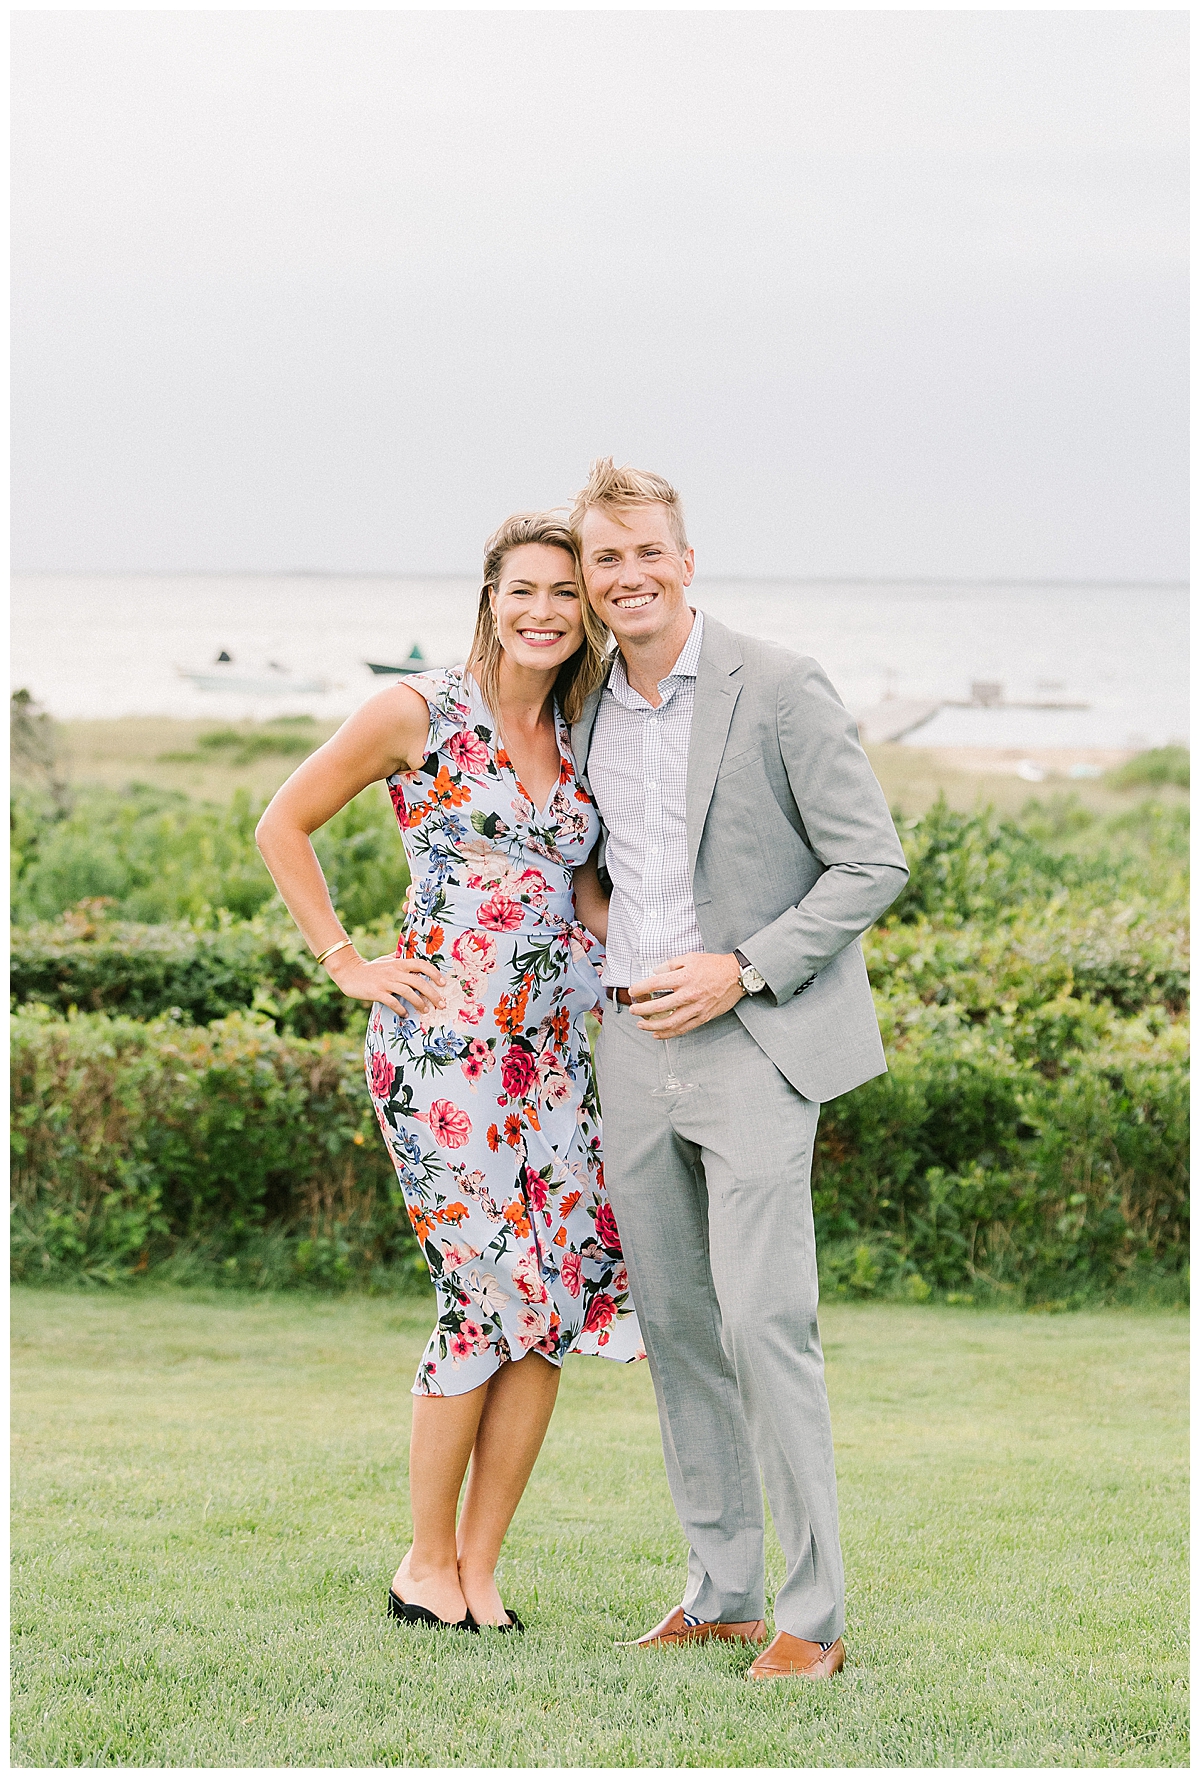 Elizabeth and Jared's Nantucket Micro Wedding Family Portraits at the Wauwinet